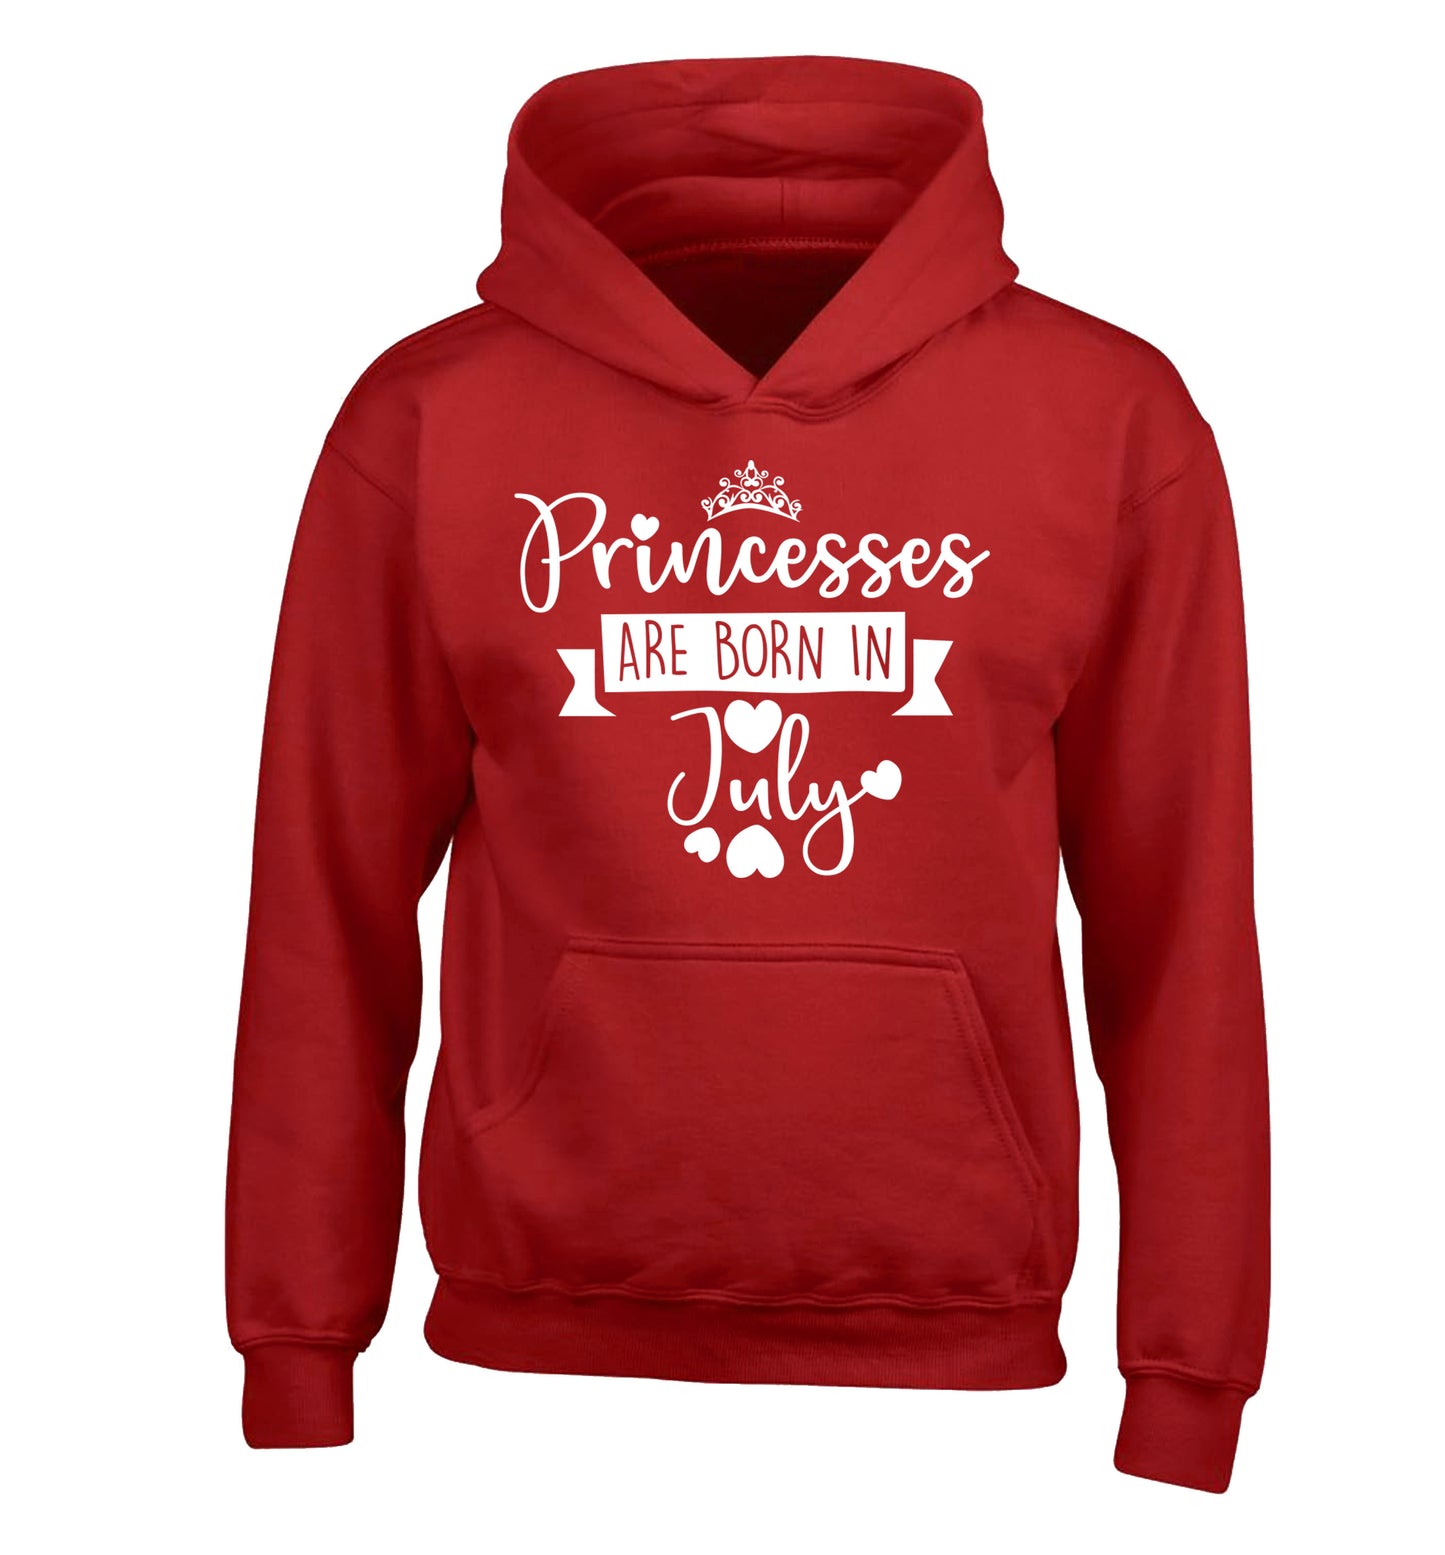 Princesses are born in July children's red hoodie 12-13 Years